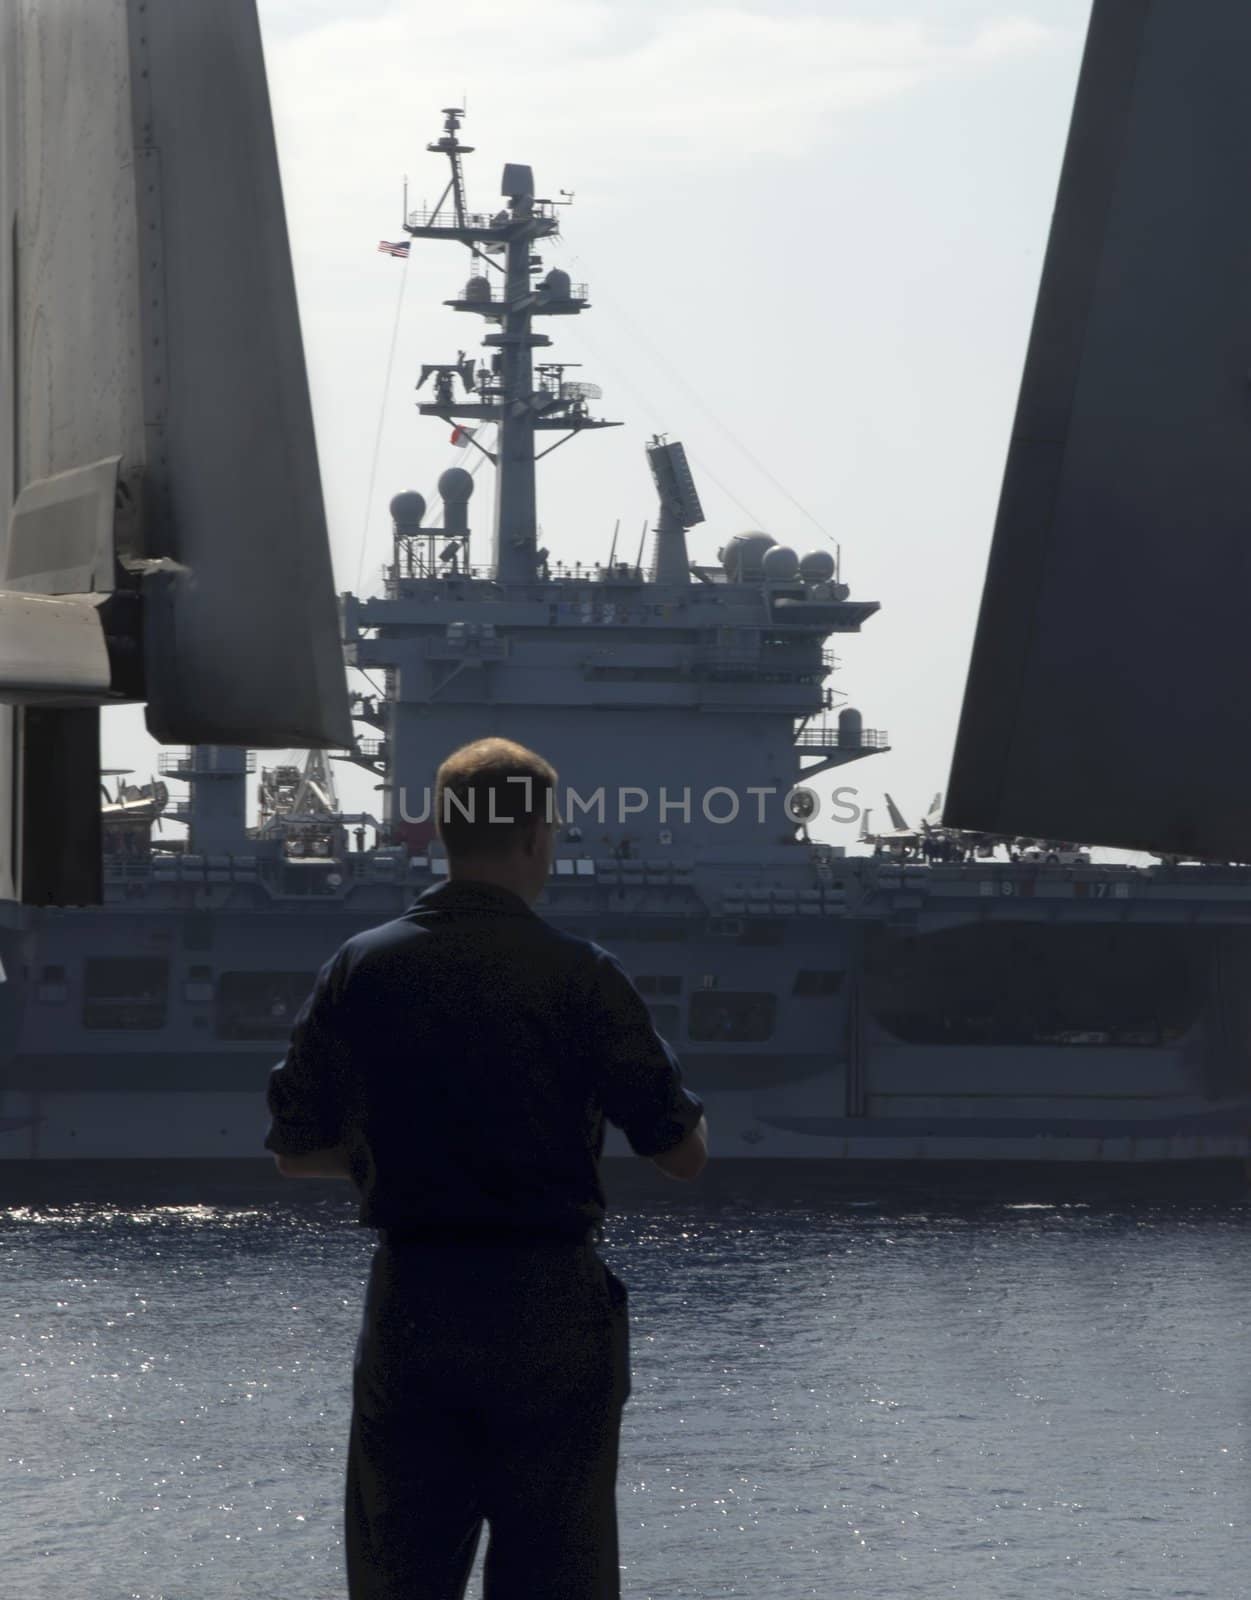 A sailor watches longingly as an aircraft carrier passes his ship on its way home